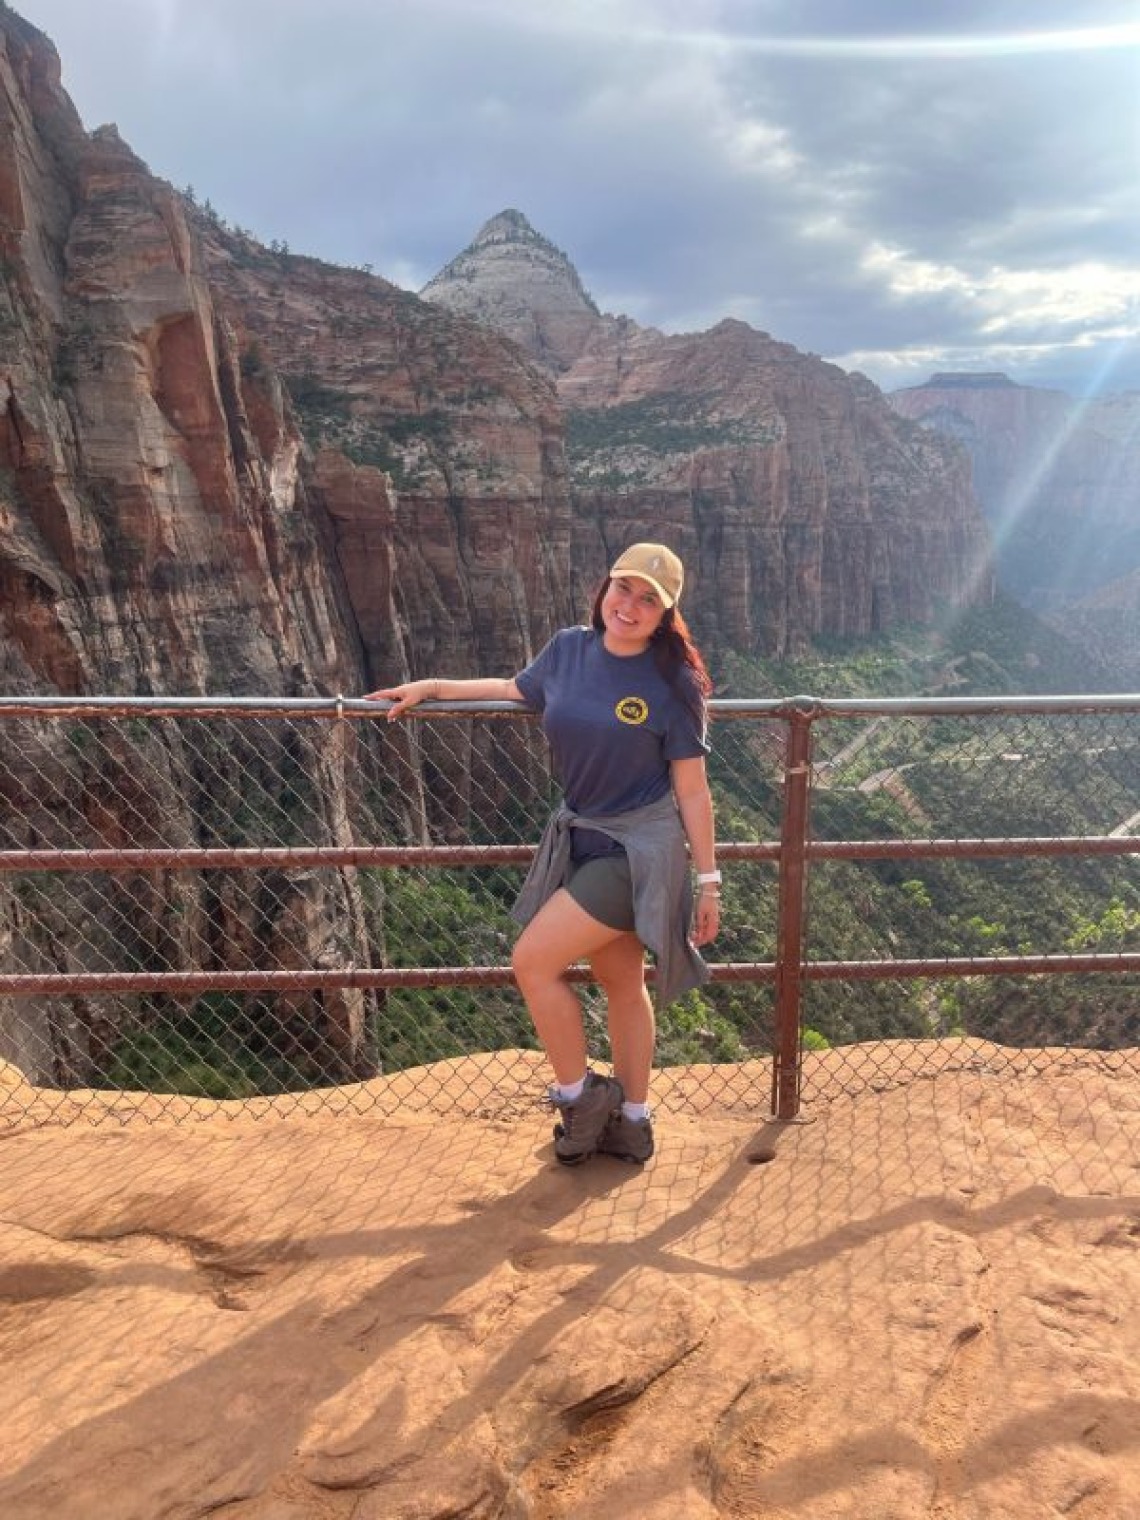 Gabriella Parra posing for a picture in front of the canyon at Zion national park.